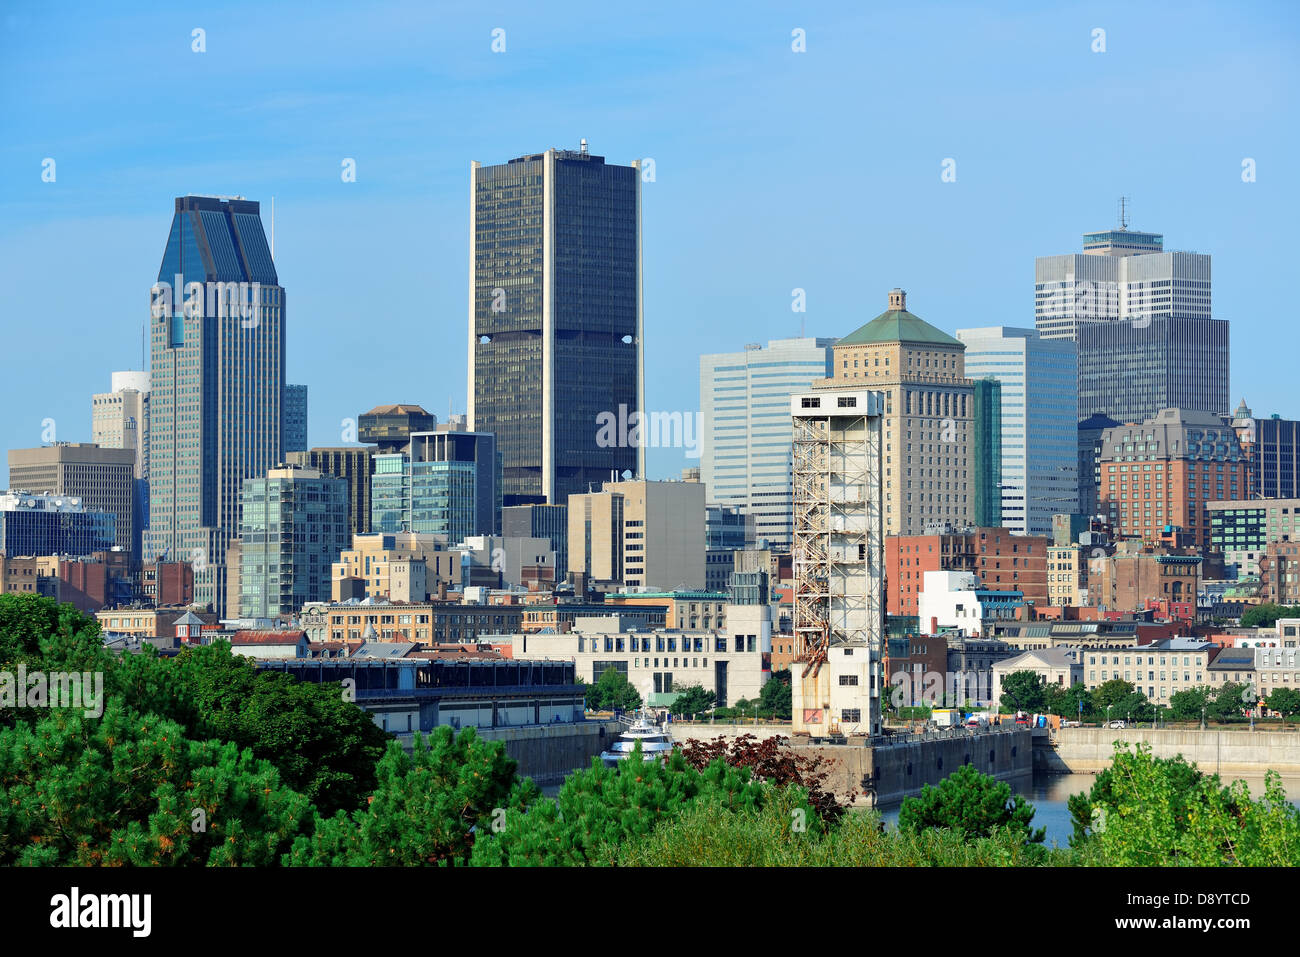 Montreal city skyline in the day with urban buildings Stock Photo